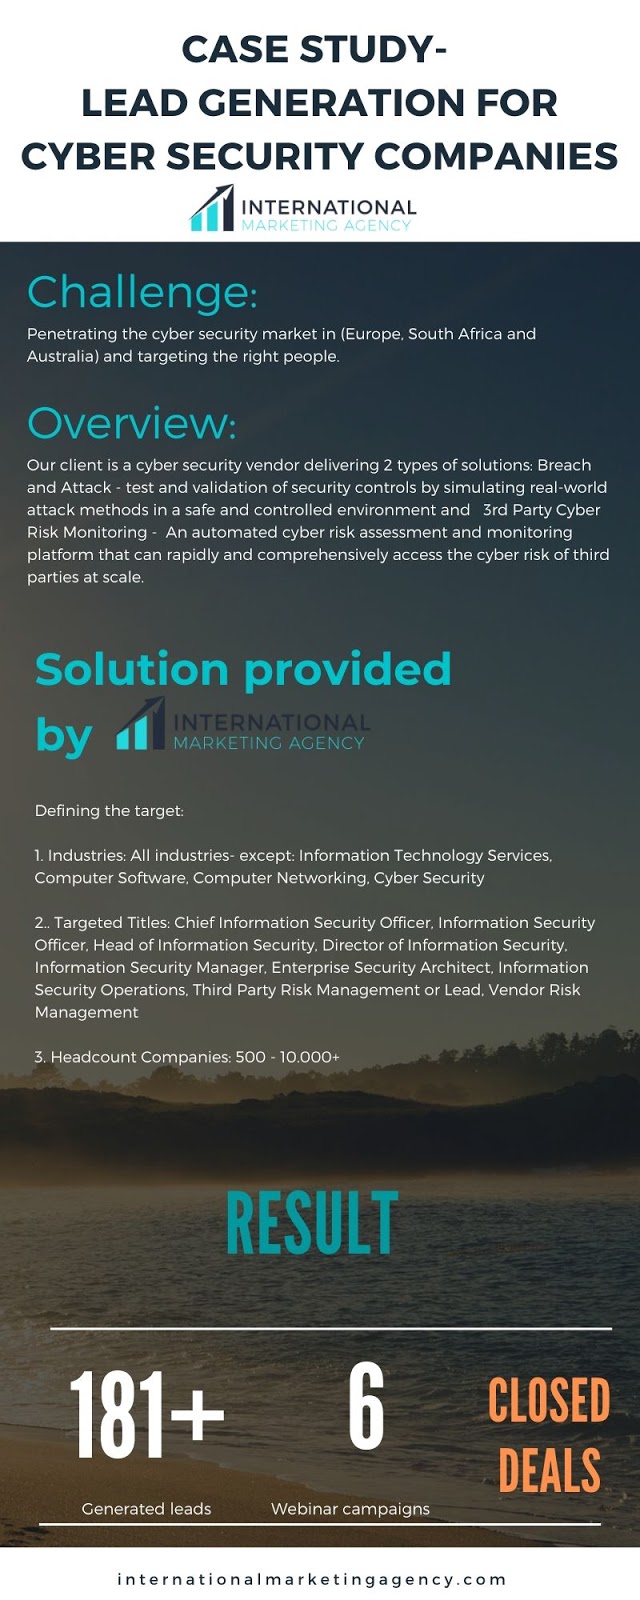 Case Study - Lead generation for Cyber Security companies